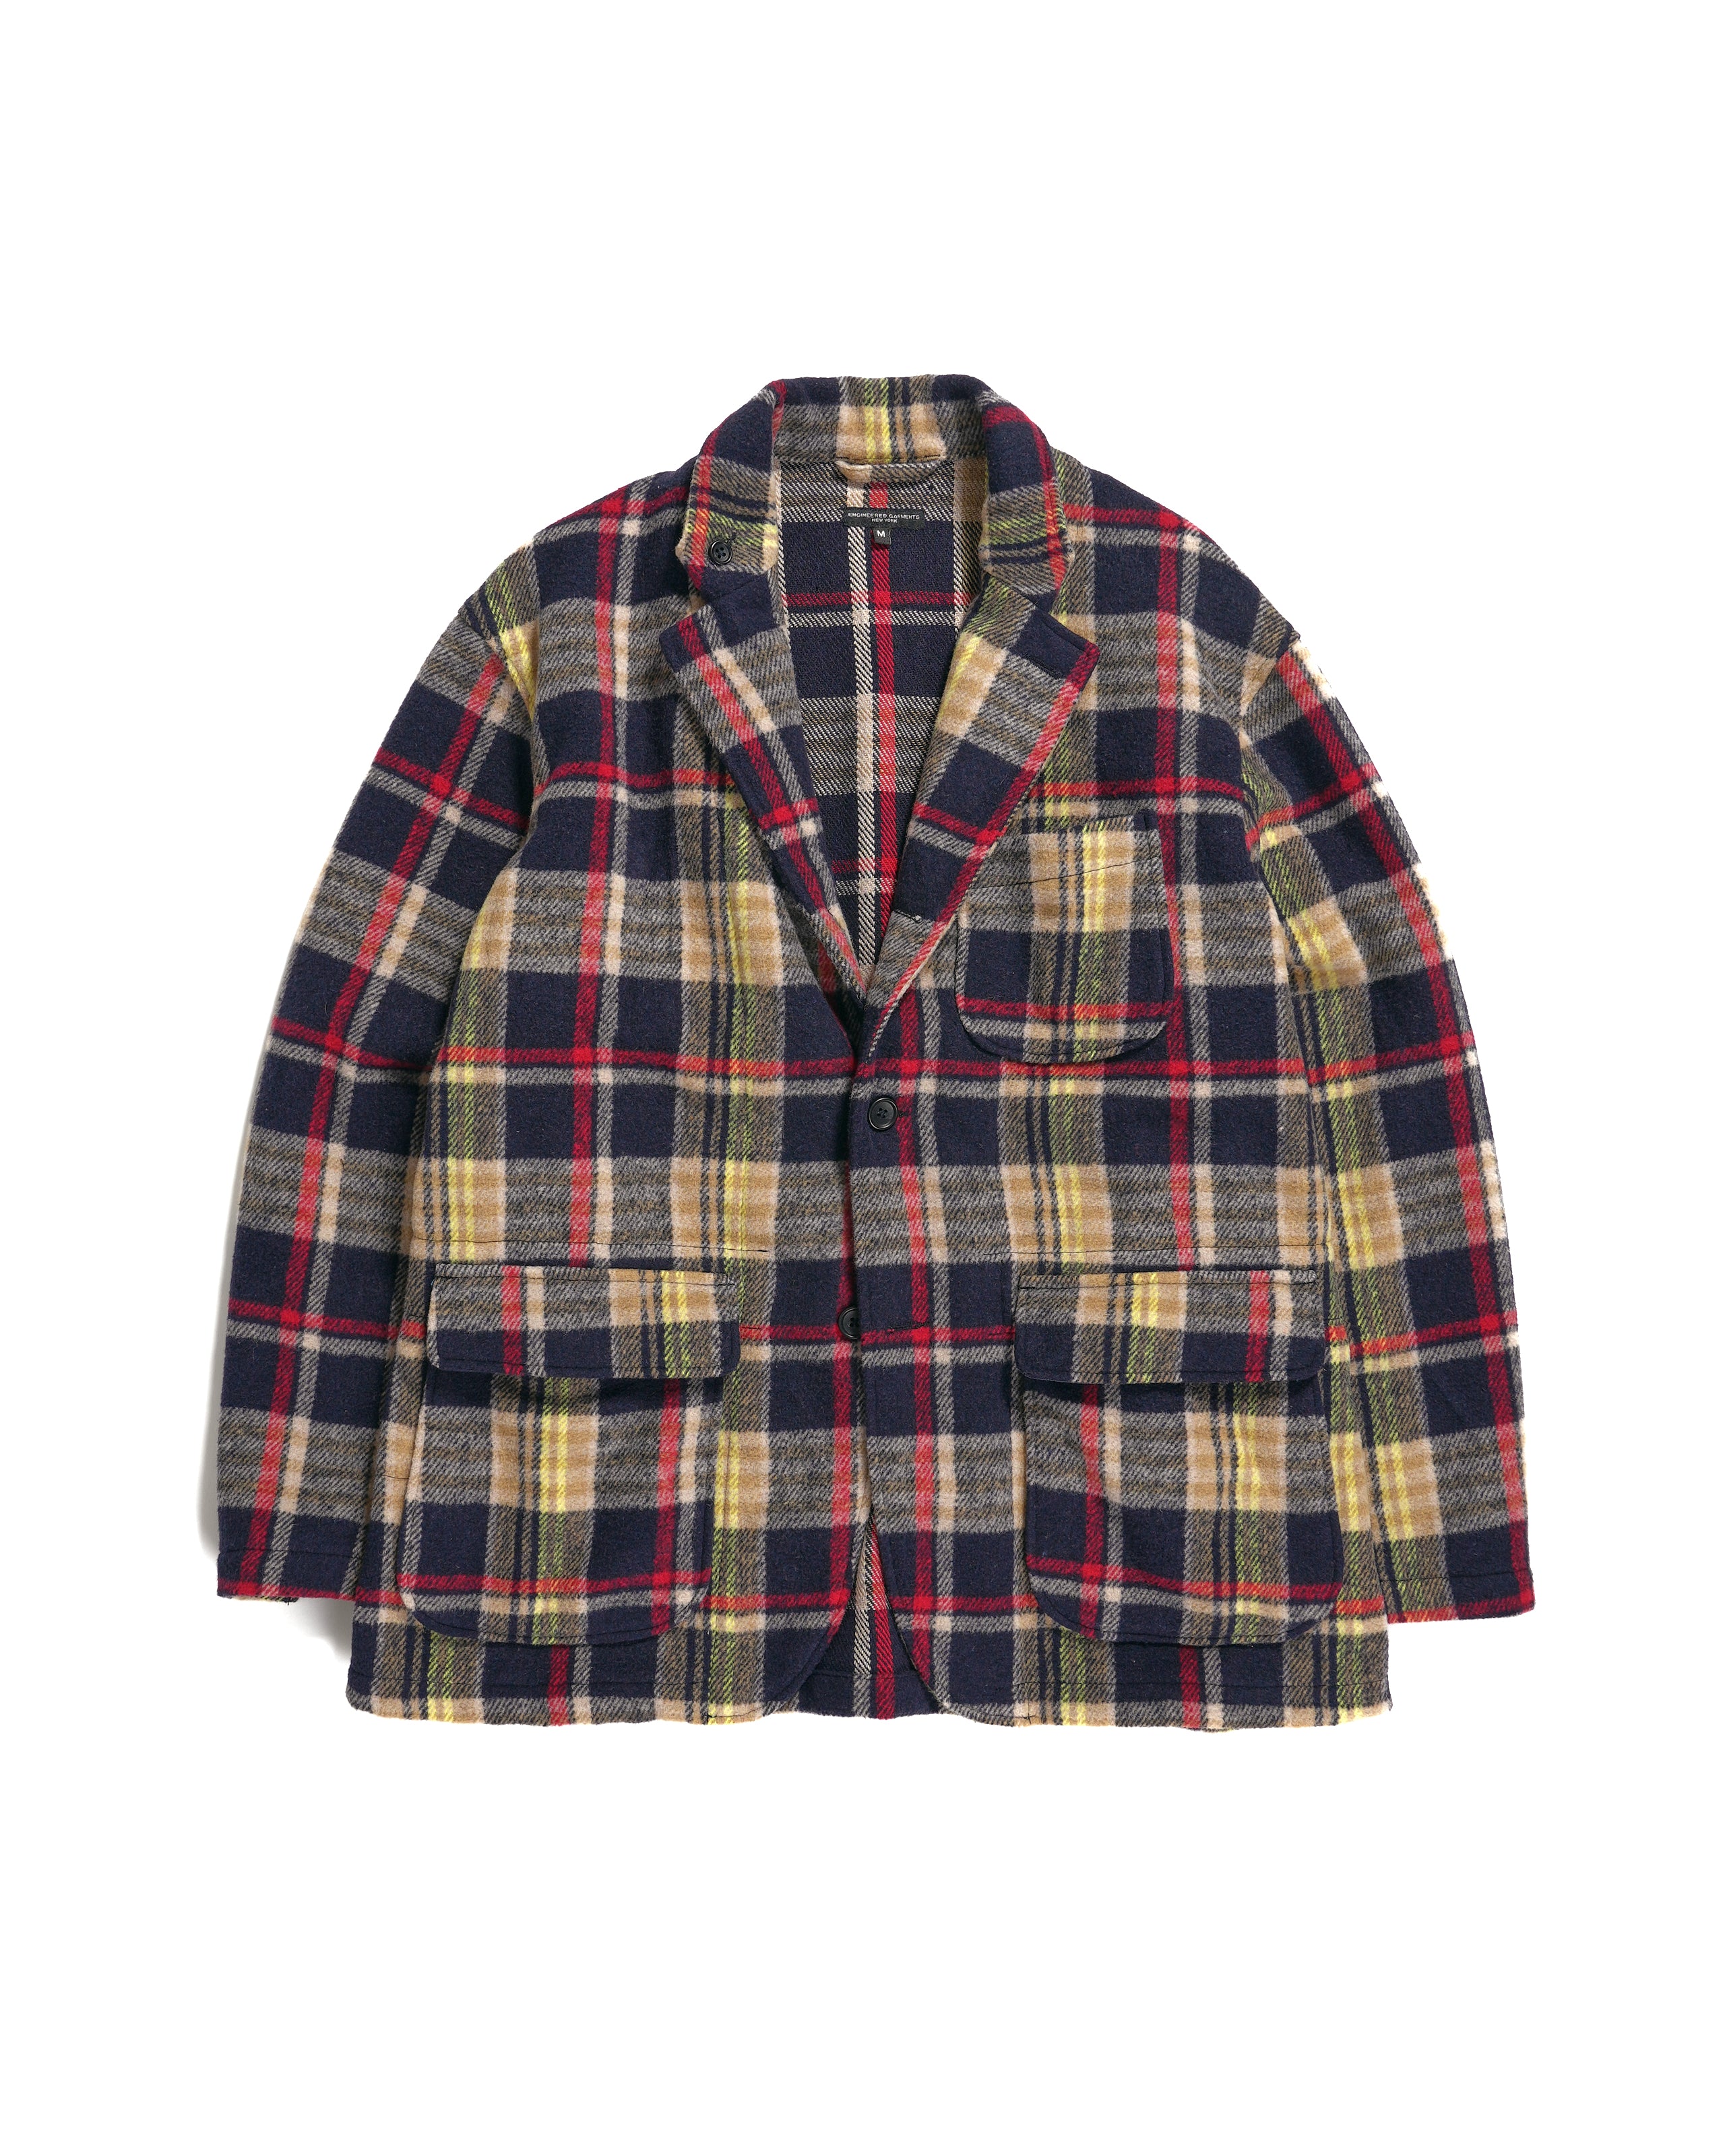 Loiter Jacket - Navy / Red Polyester Heavy Plaid | Nepenthes New York